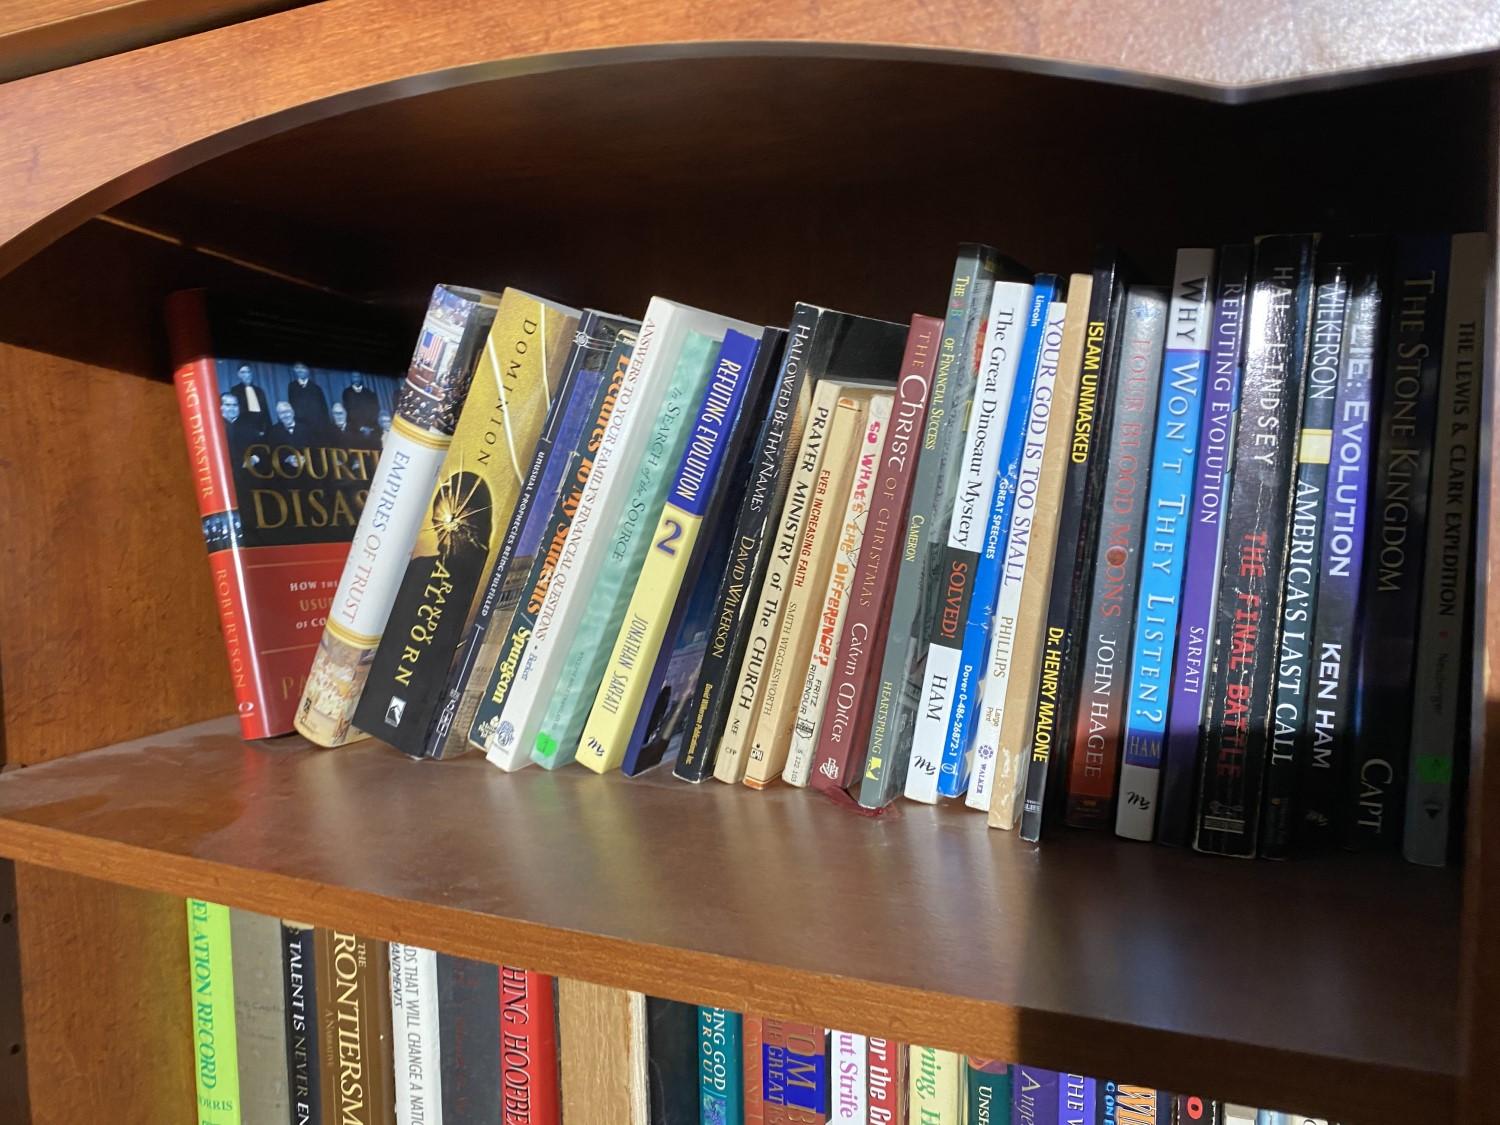 Contents of three shelves - books